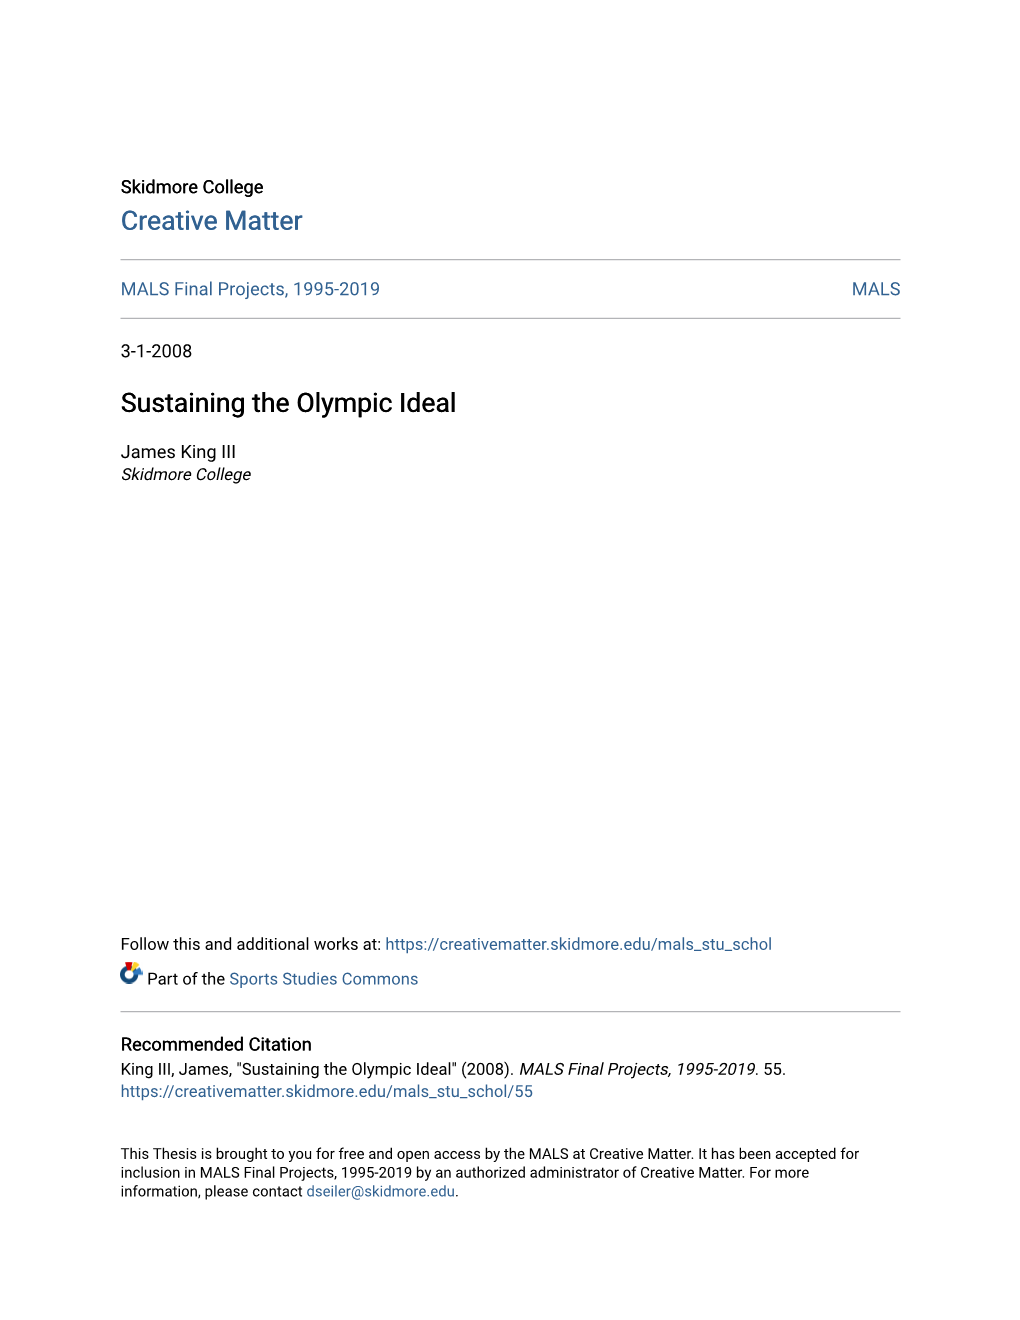 Sustaining the Olympic Ideal